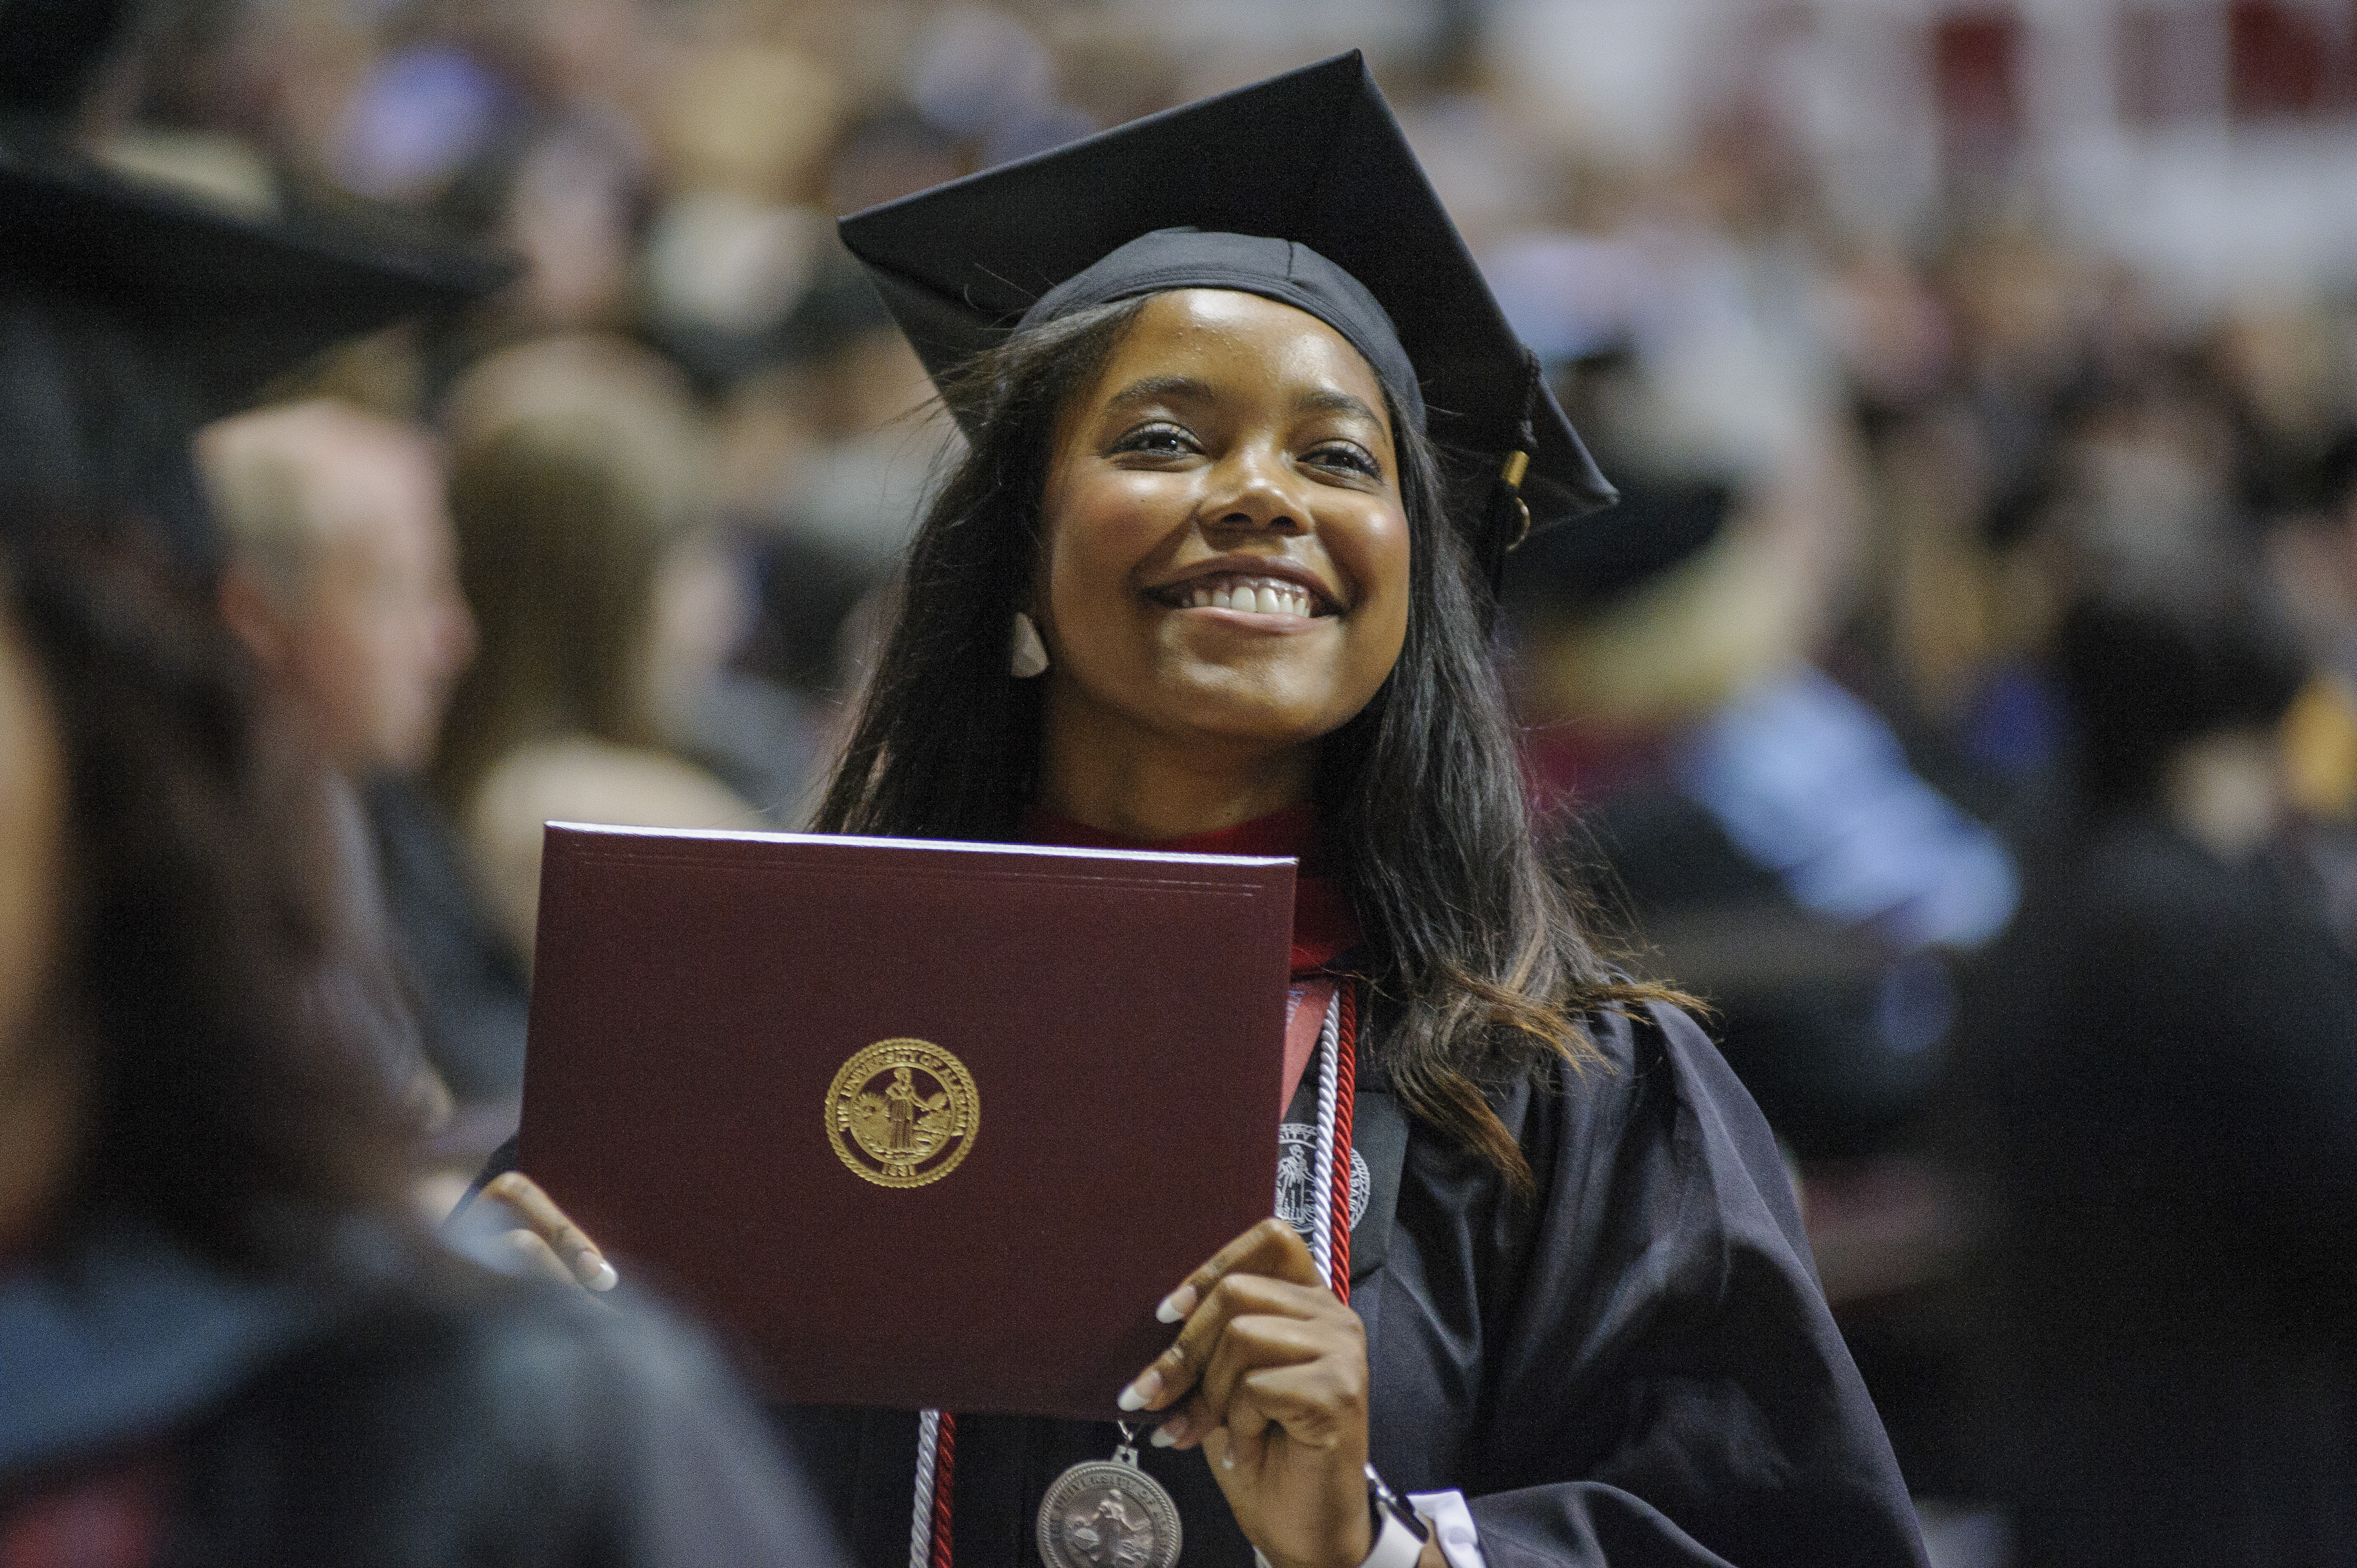 UA to Hold its Winter Commencement Exercises